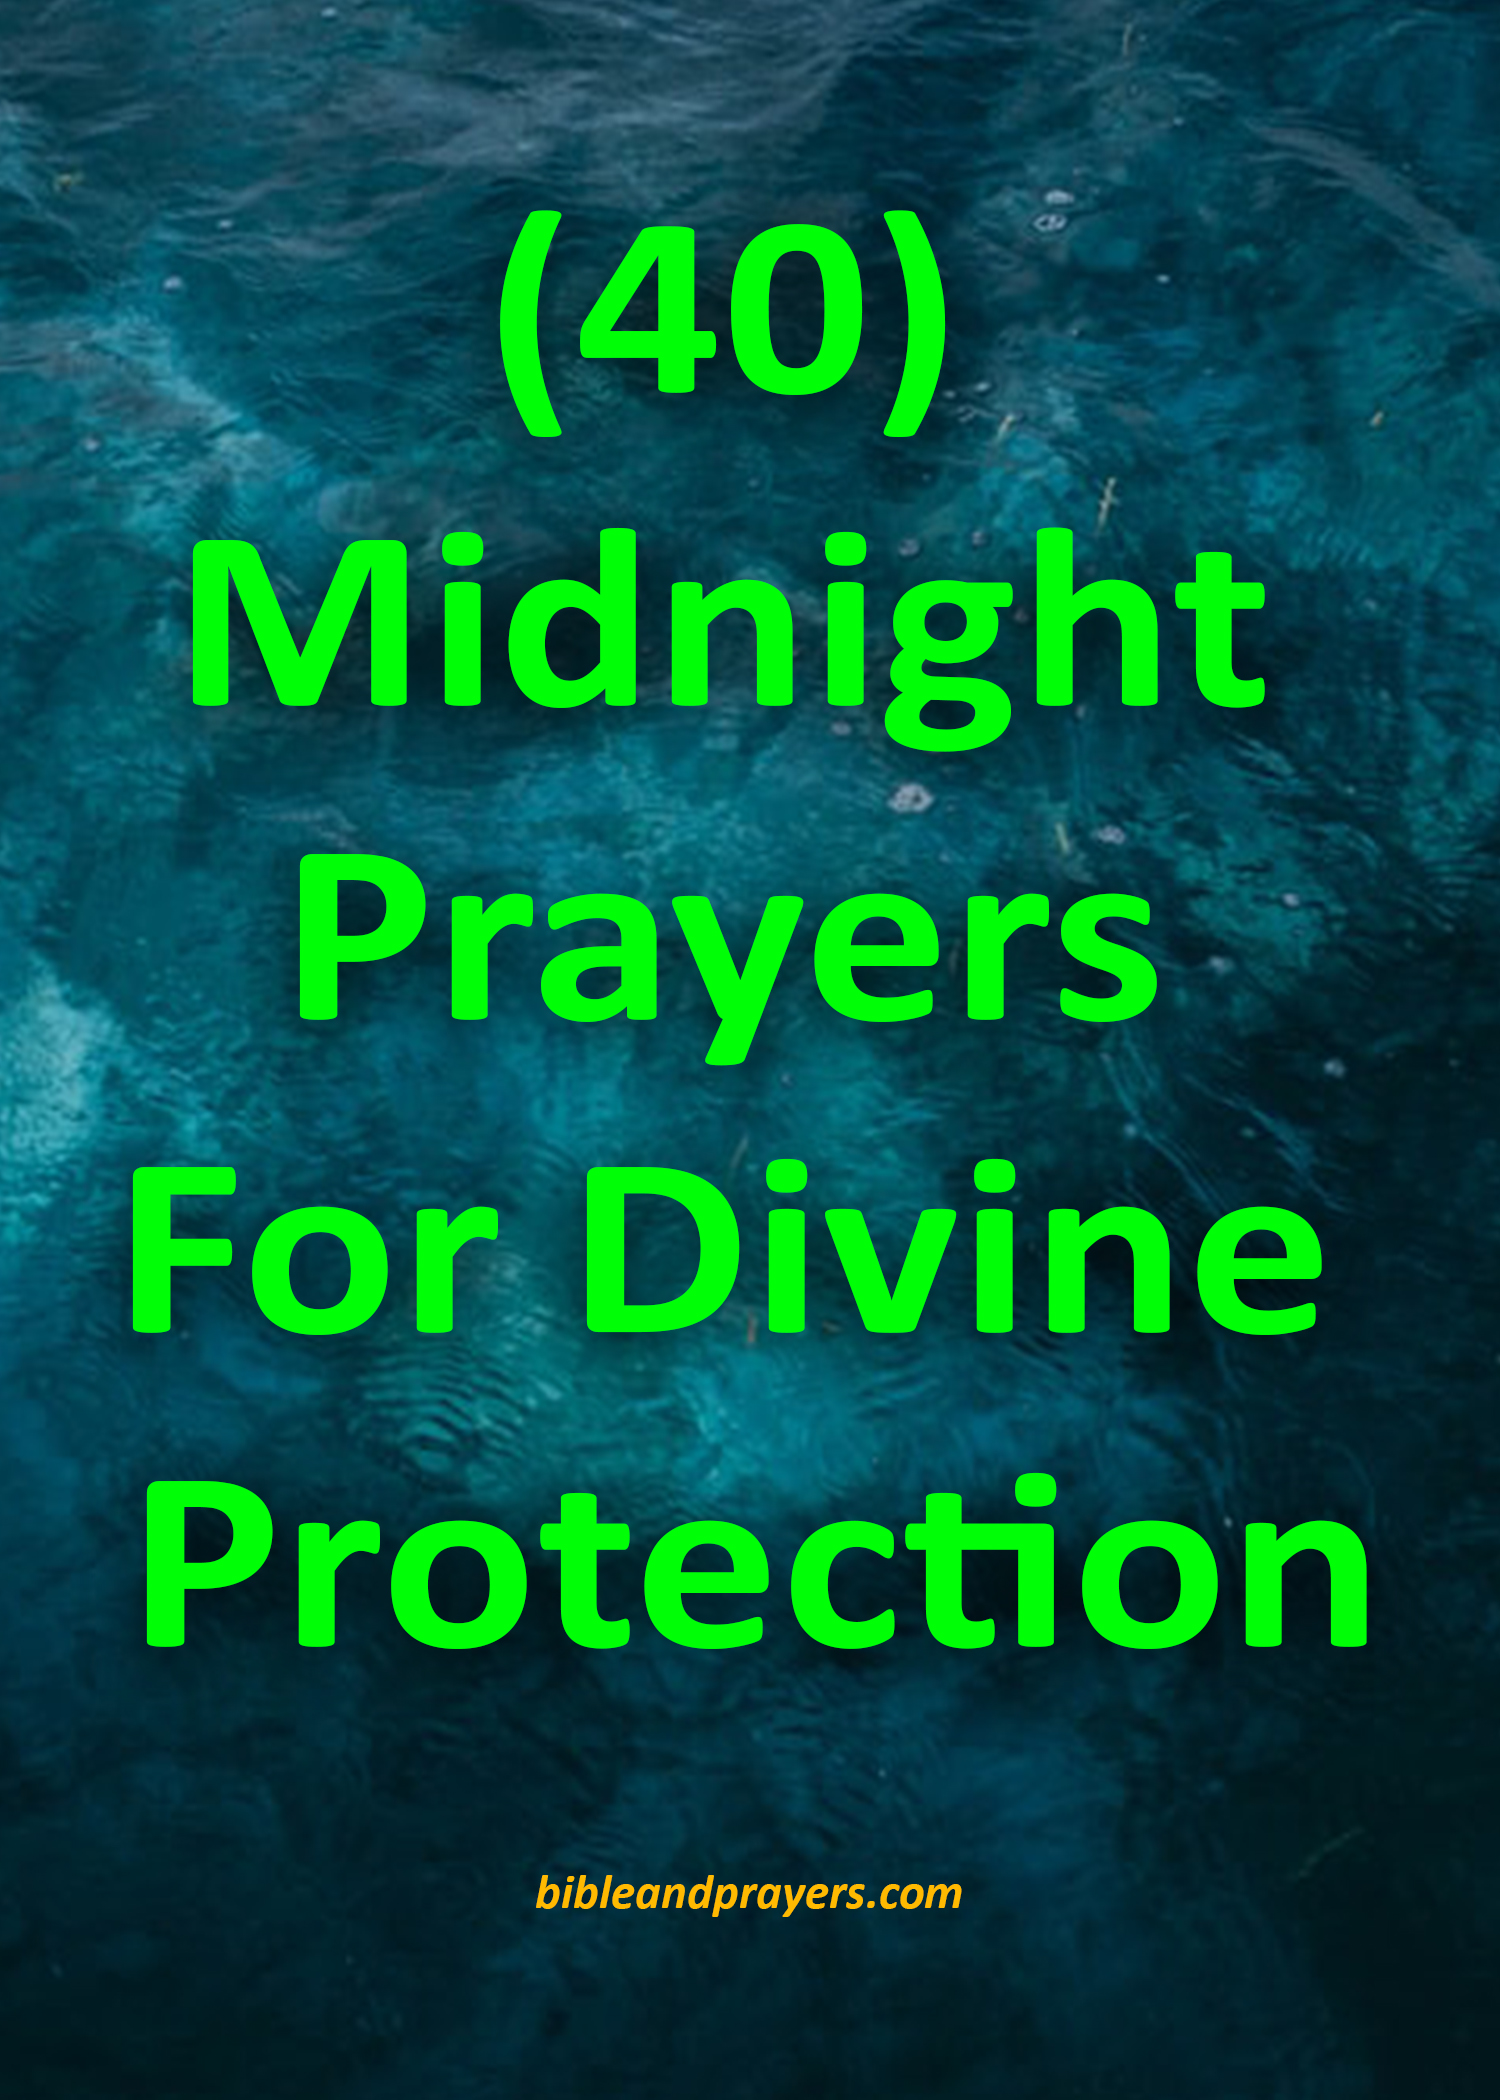 40 Midnight Prayers For Divine Protection